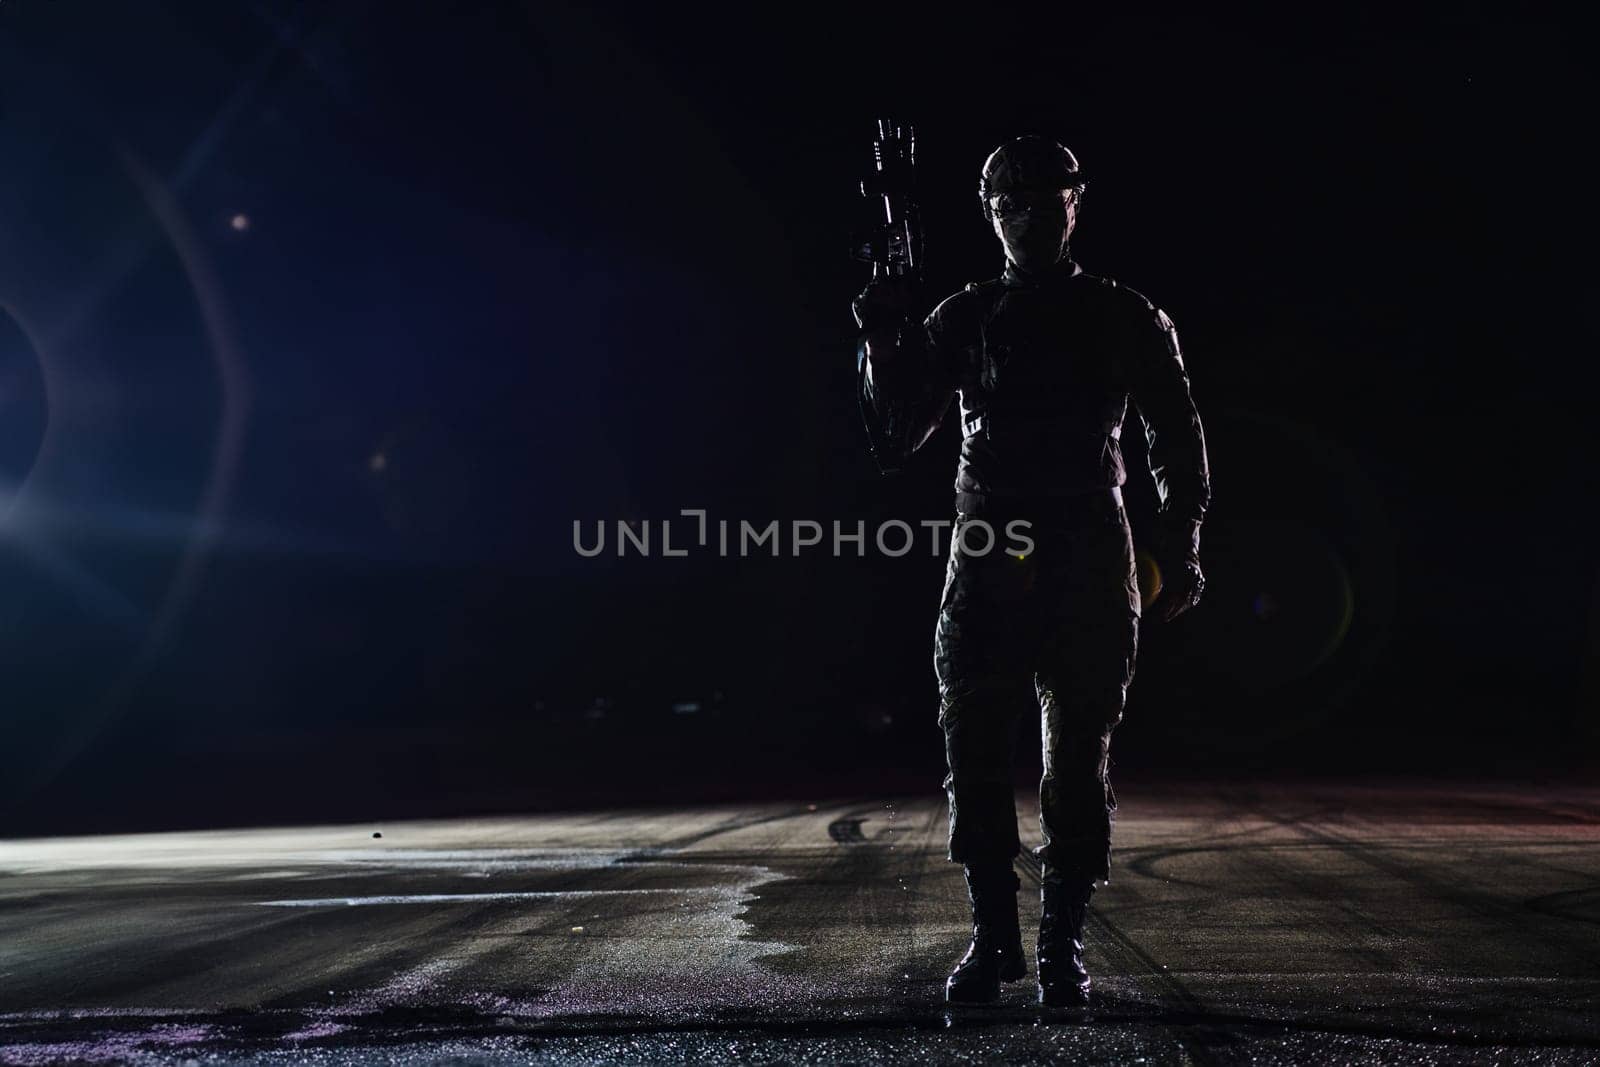 A professional soldier in full military gear striding through the dark night as he embarks on a perilous military mission by dotshock